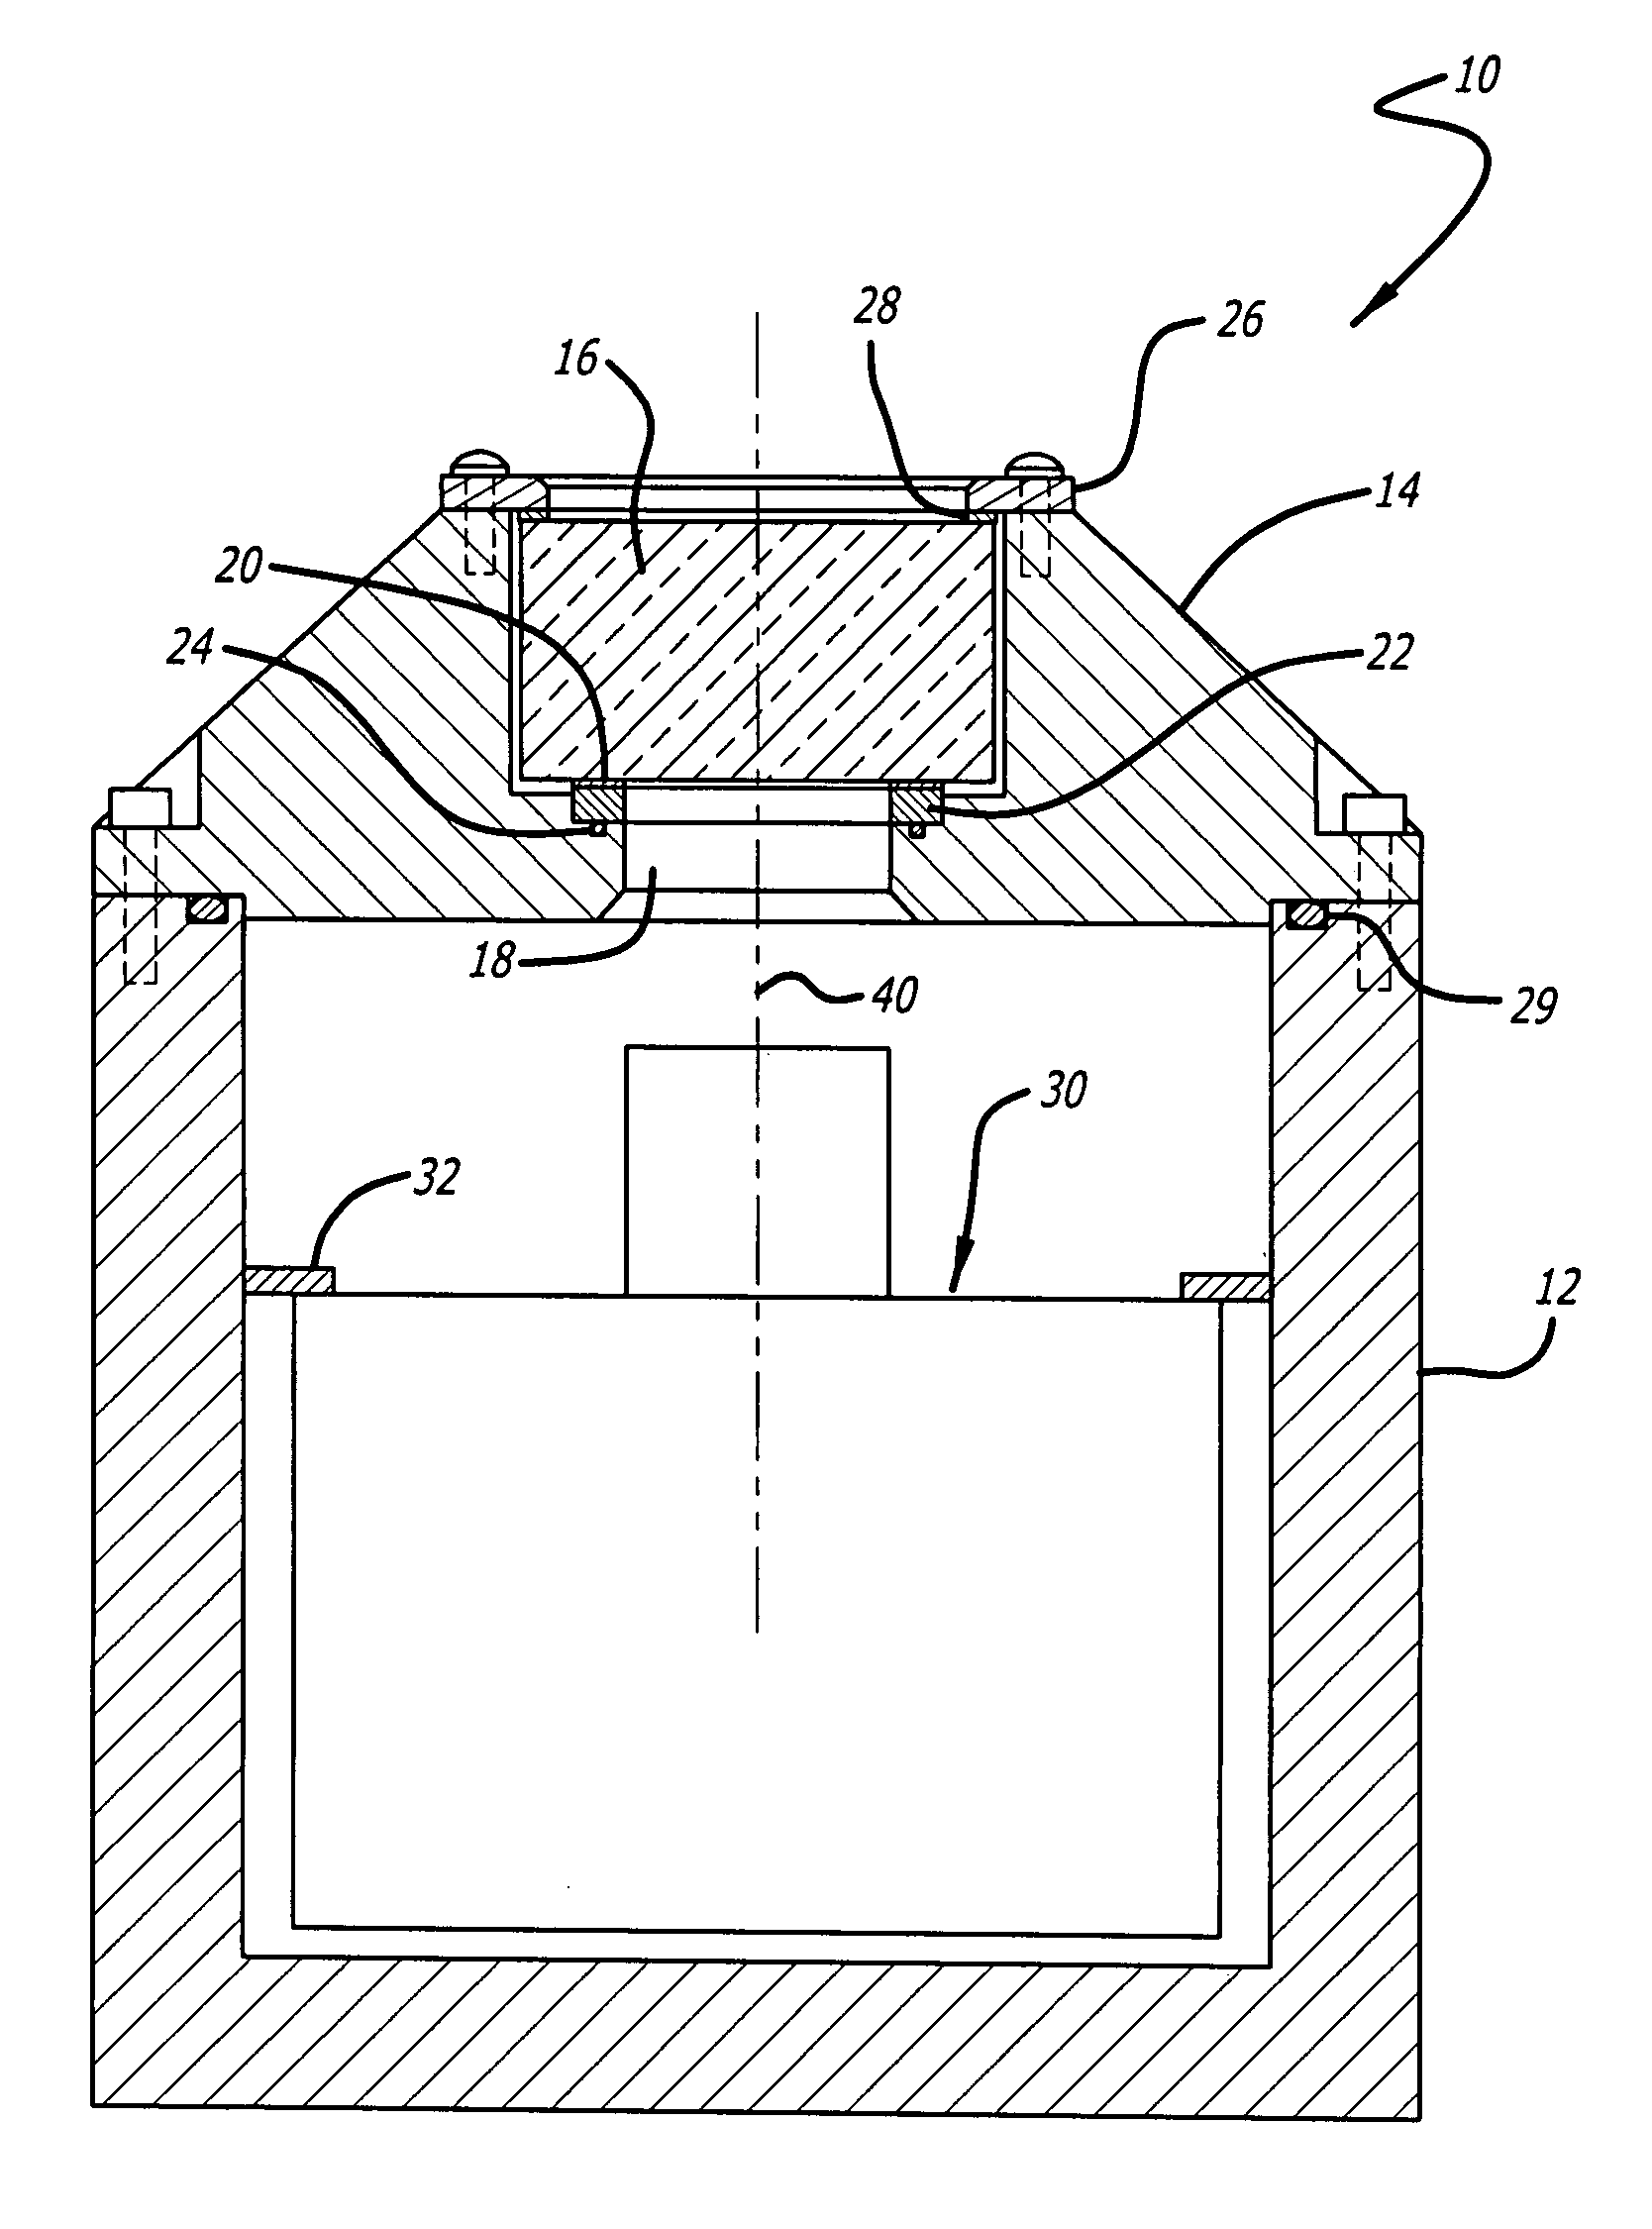 Housing with glass window for optical instruments in high pressure underwater environments